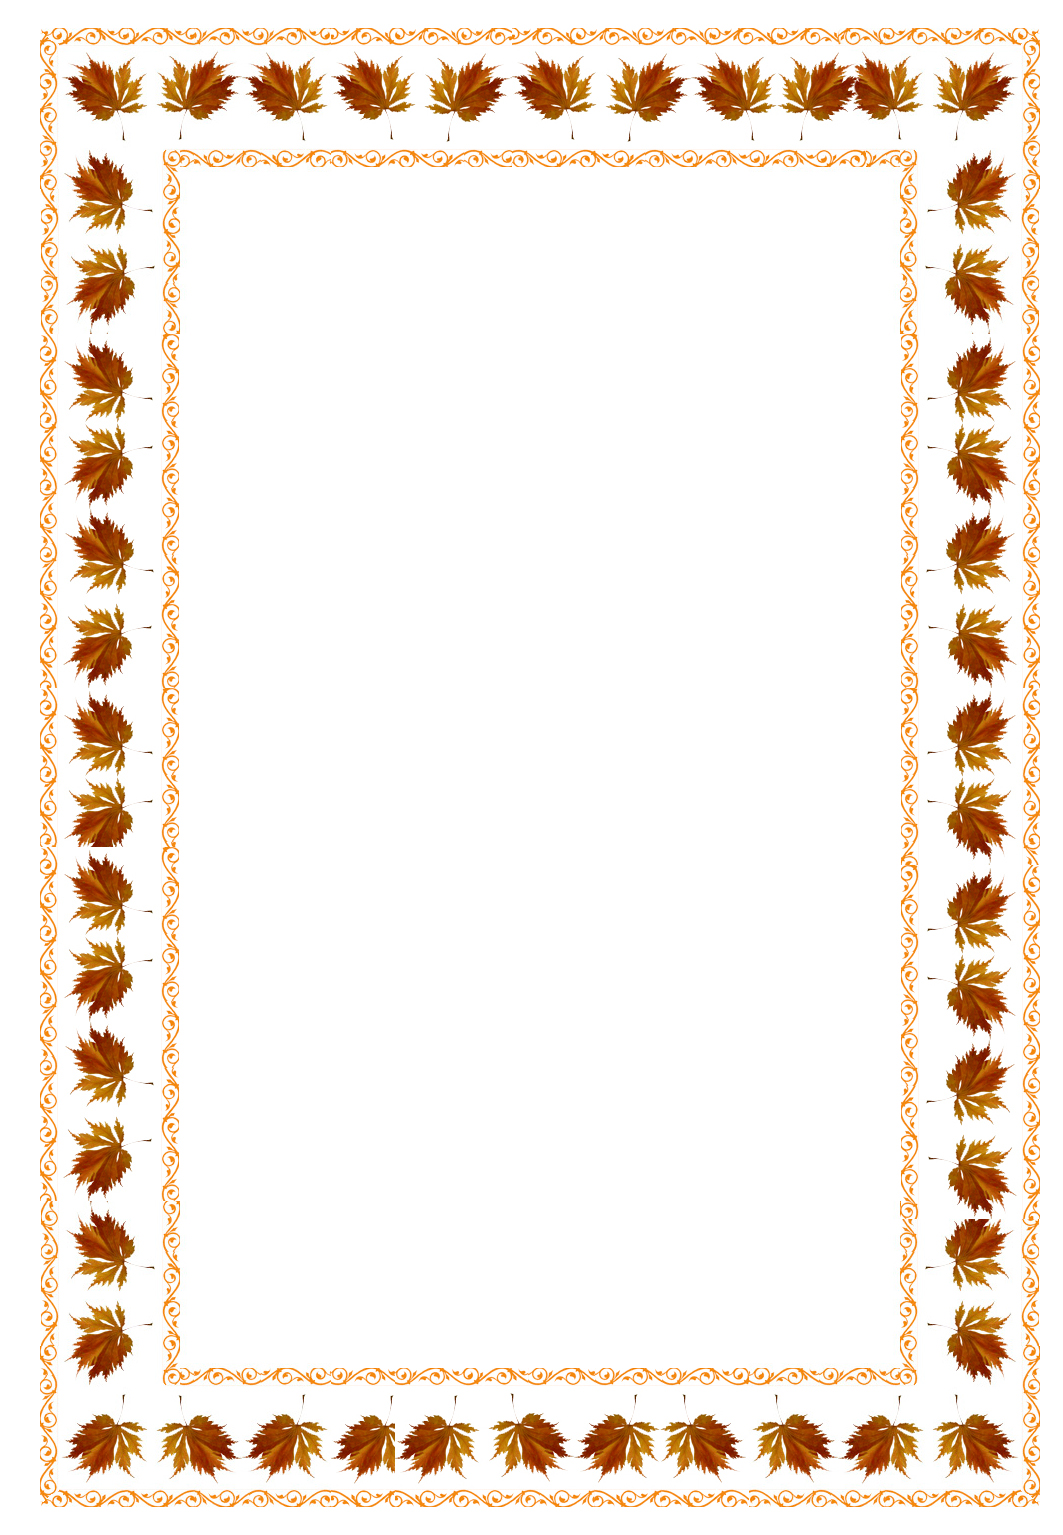 frame with fall leaves